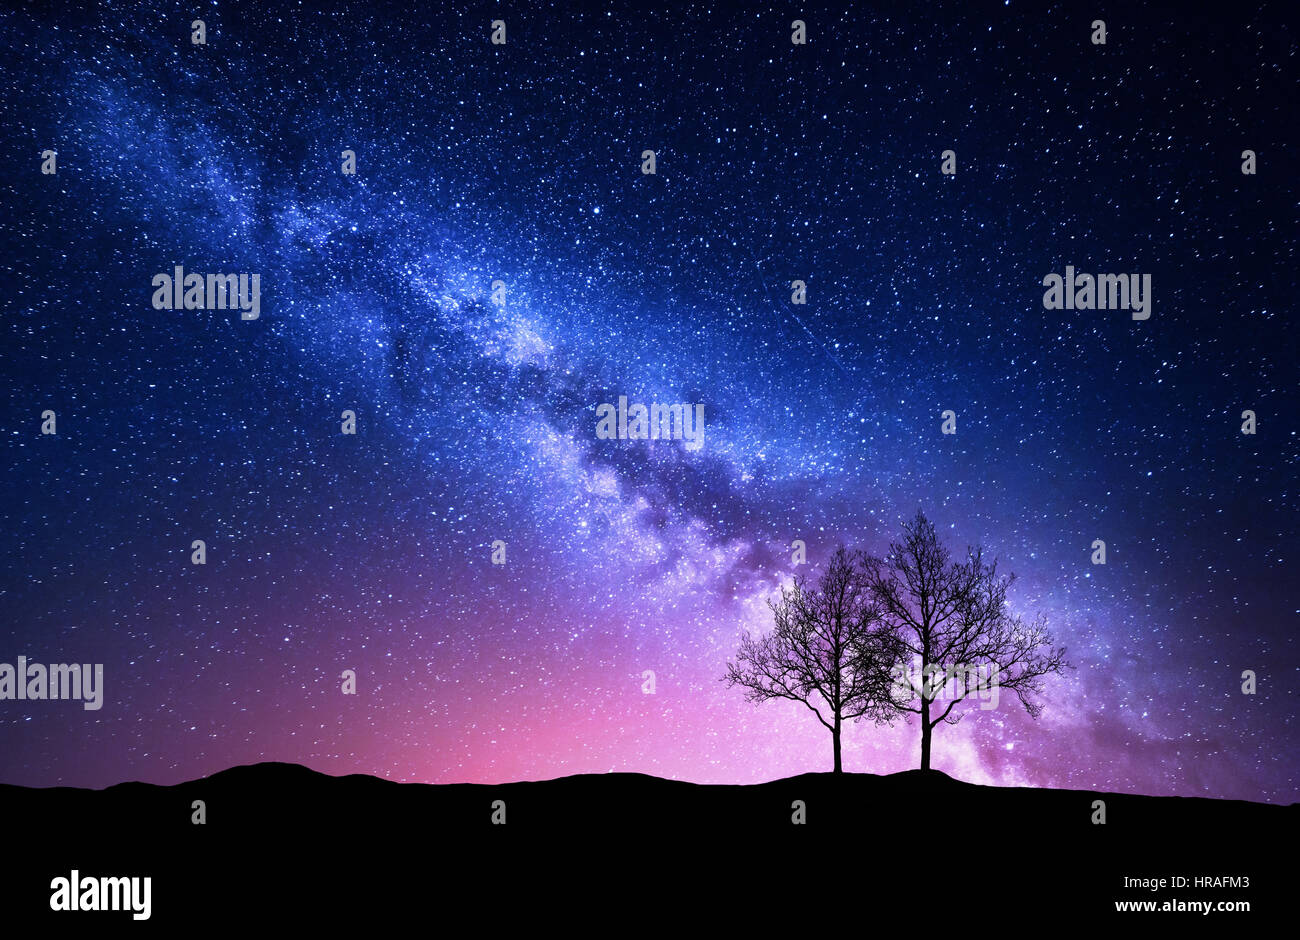 Starry sky with pink Milky Way. Night landscape with alone trees on the hill against colorful milky way. Amazing galaxy. Nature background Stock Photo